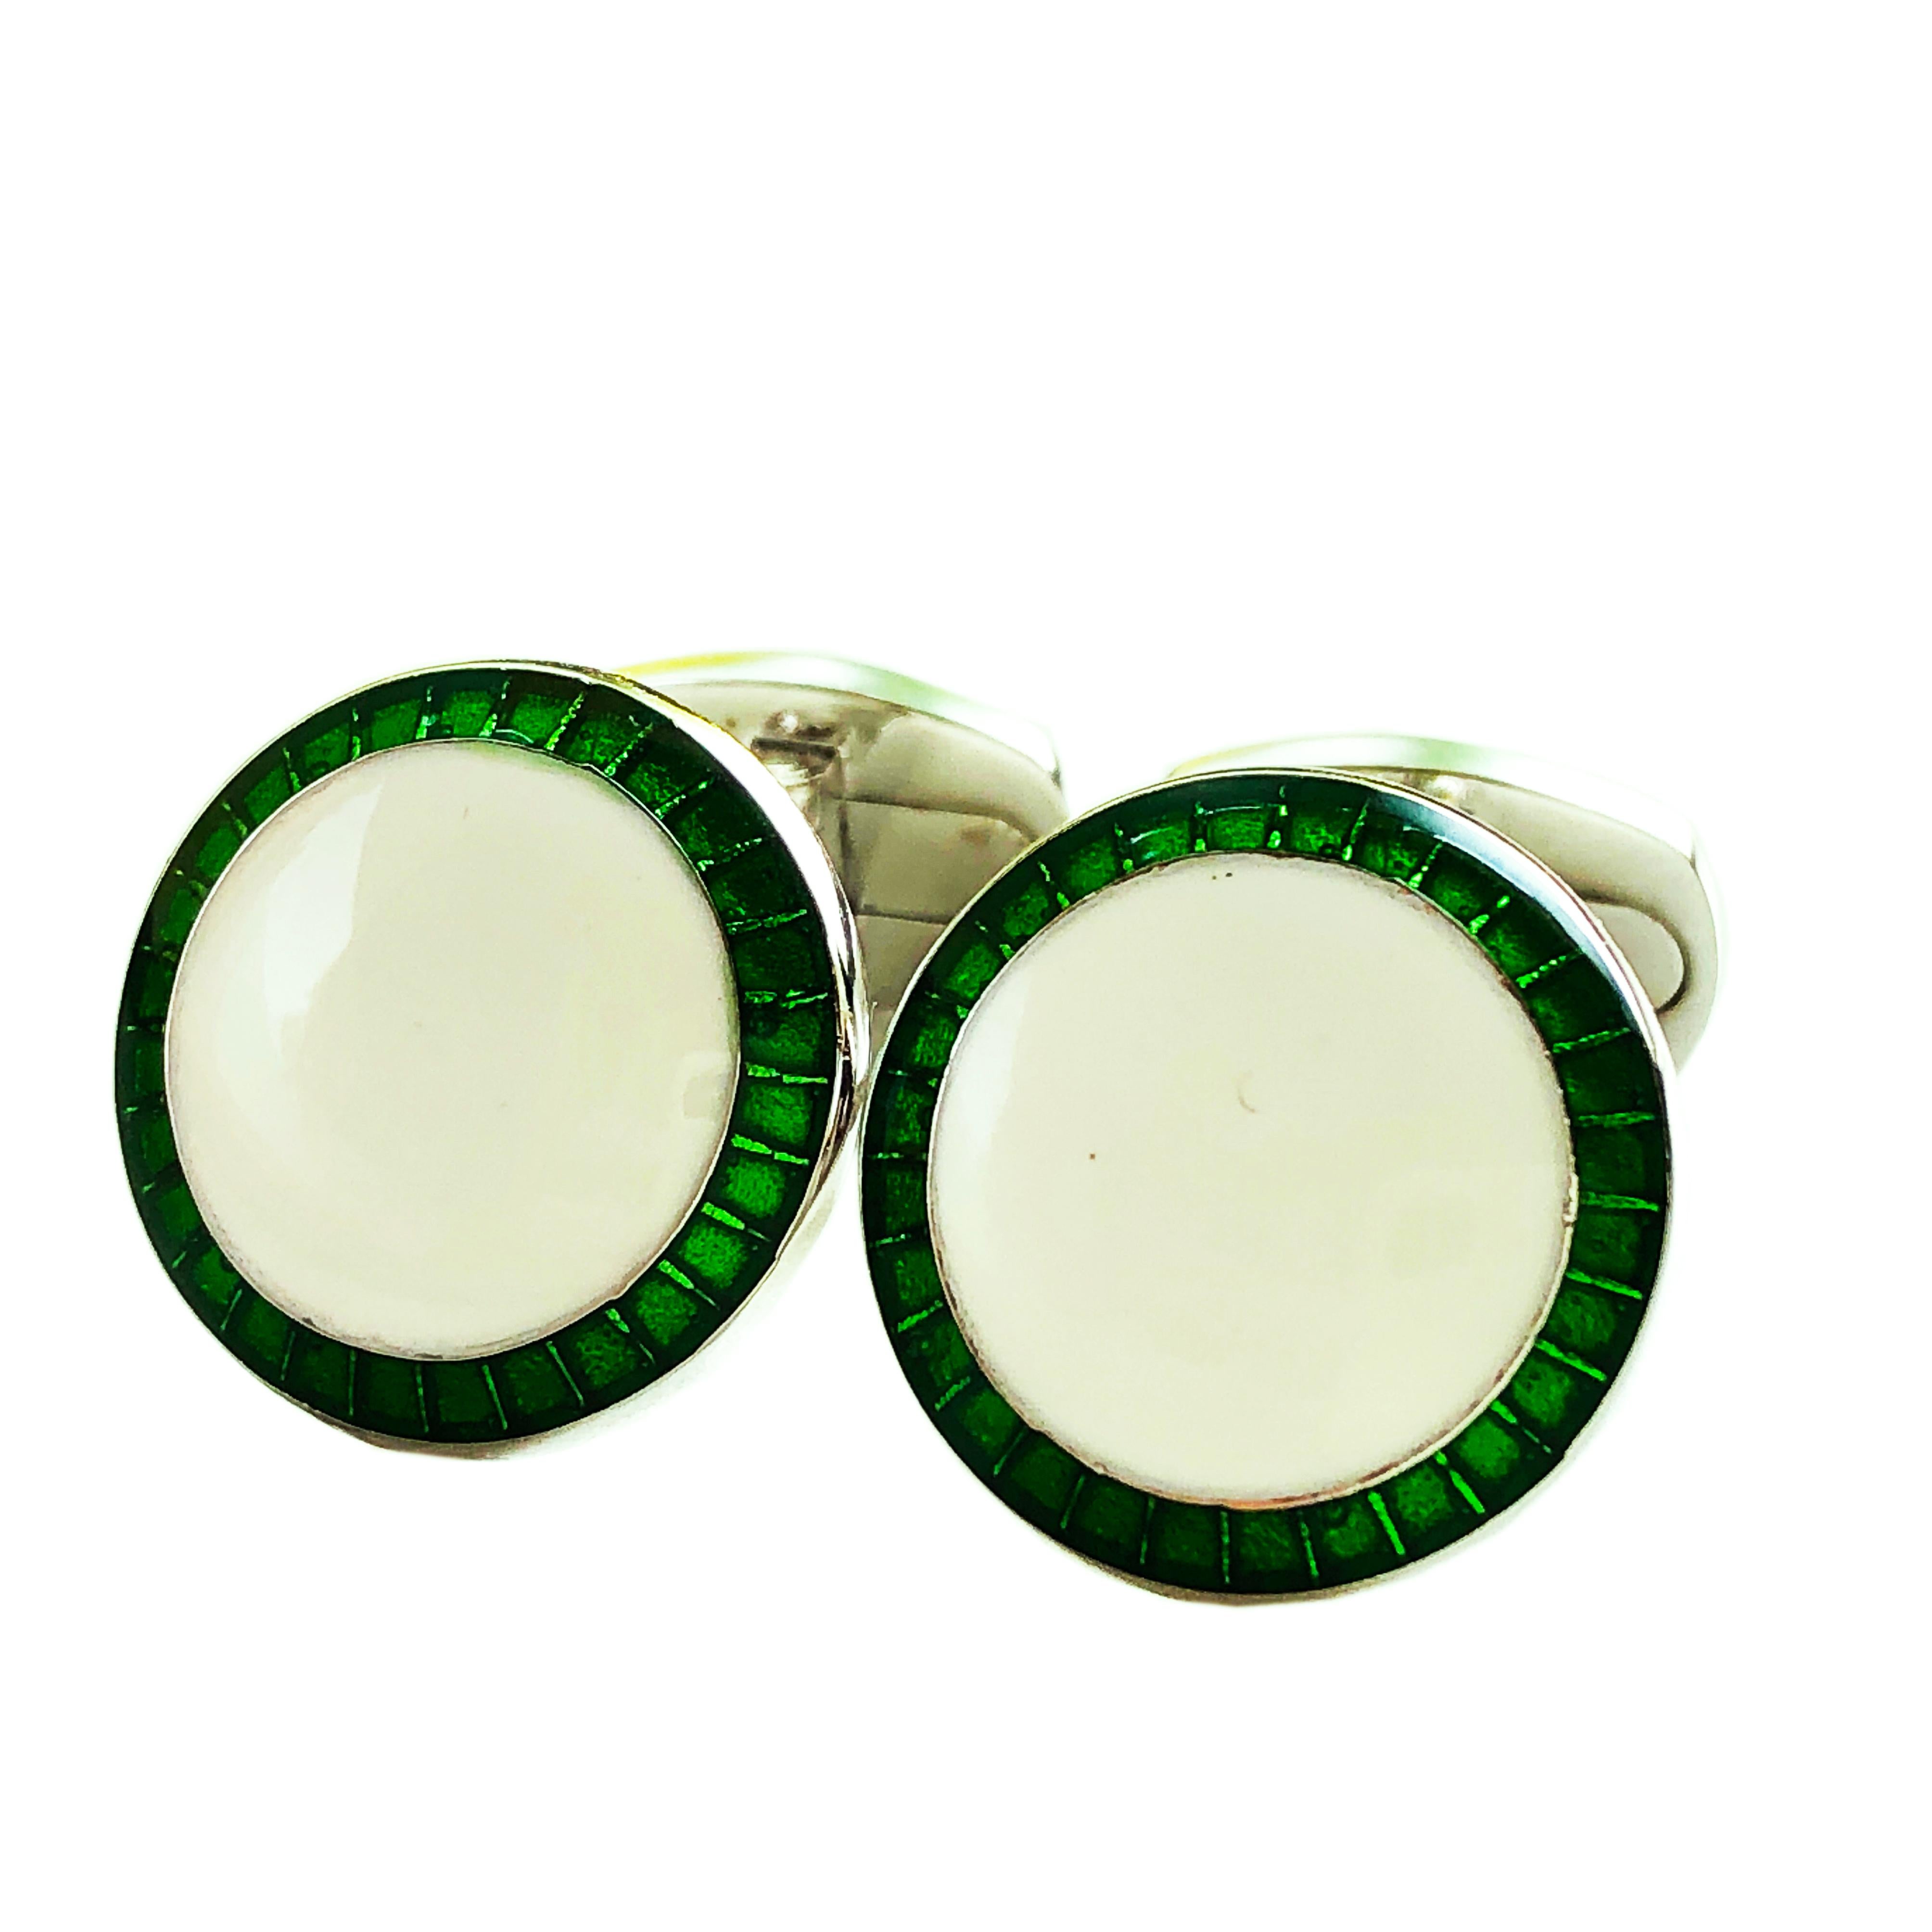 Chic yet Timeless Round White, Transparent Vivid Green Border Hand Enamelled Sterling Silver Cufflinks, T-bar back.

In our Smart Black Box and Pouch.

Front Diameter about 0.633 inches.